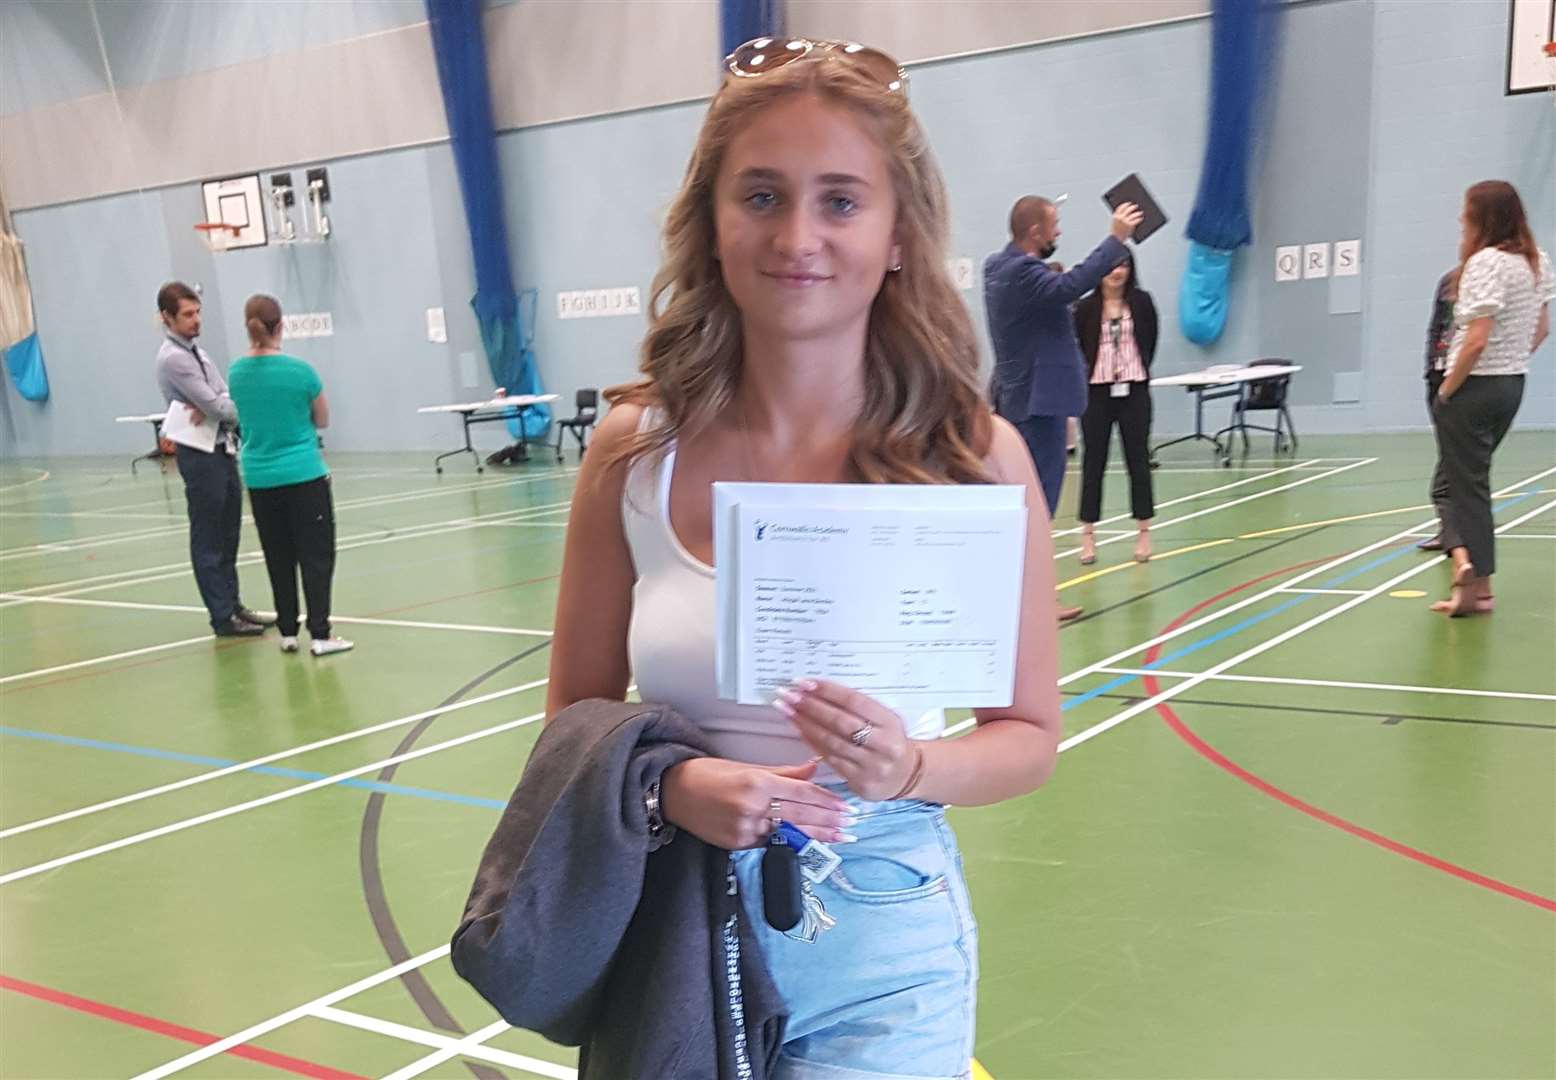 Abigail Bentley form Cornwallis Academy got an A in sociology, a B in English Literature, and a B in criminology